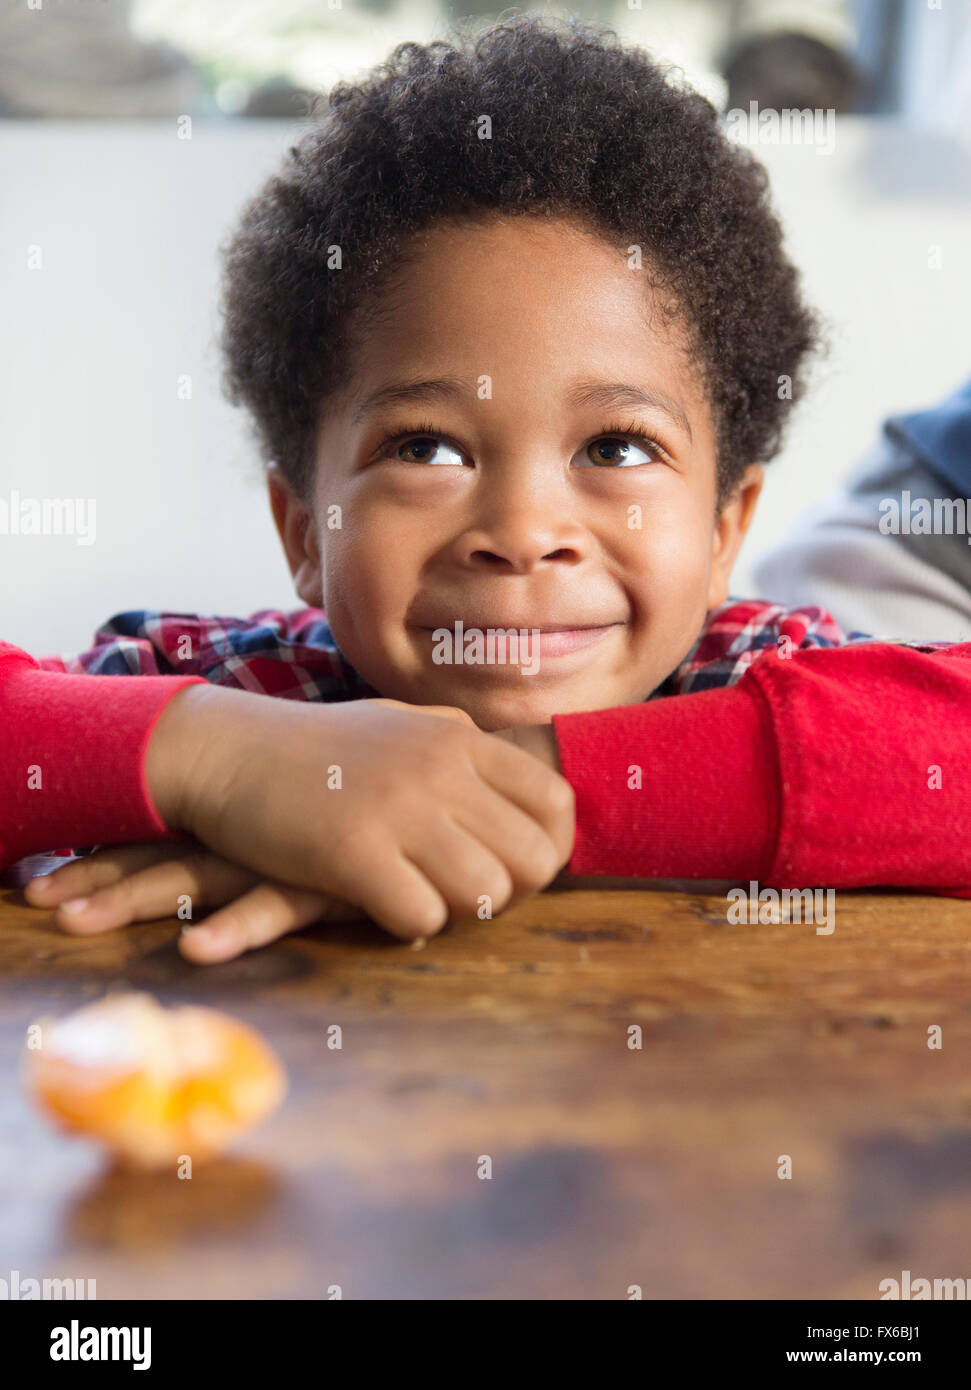 Mixed Race boy smiling at table Banque D'Images